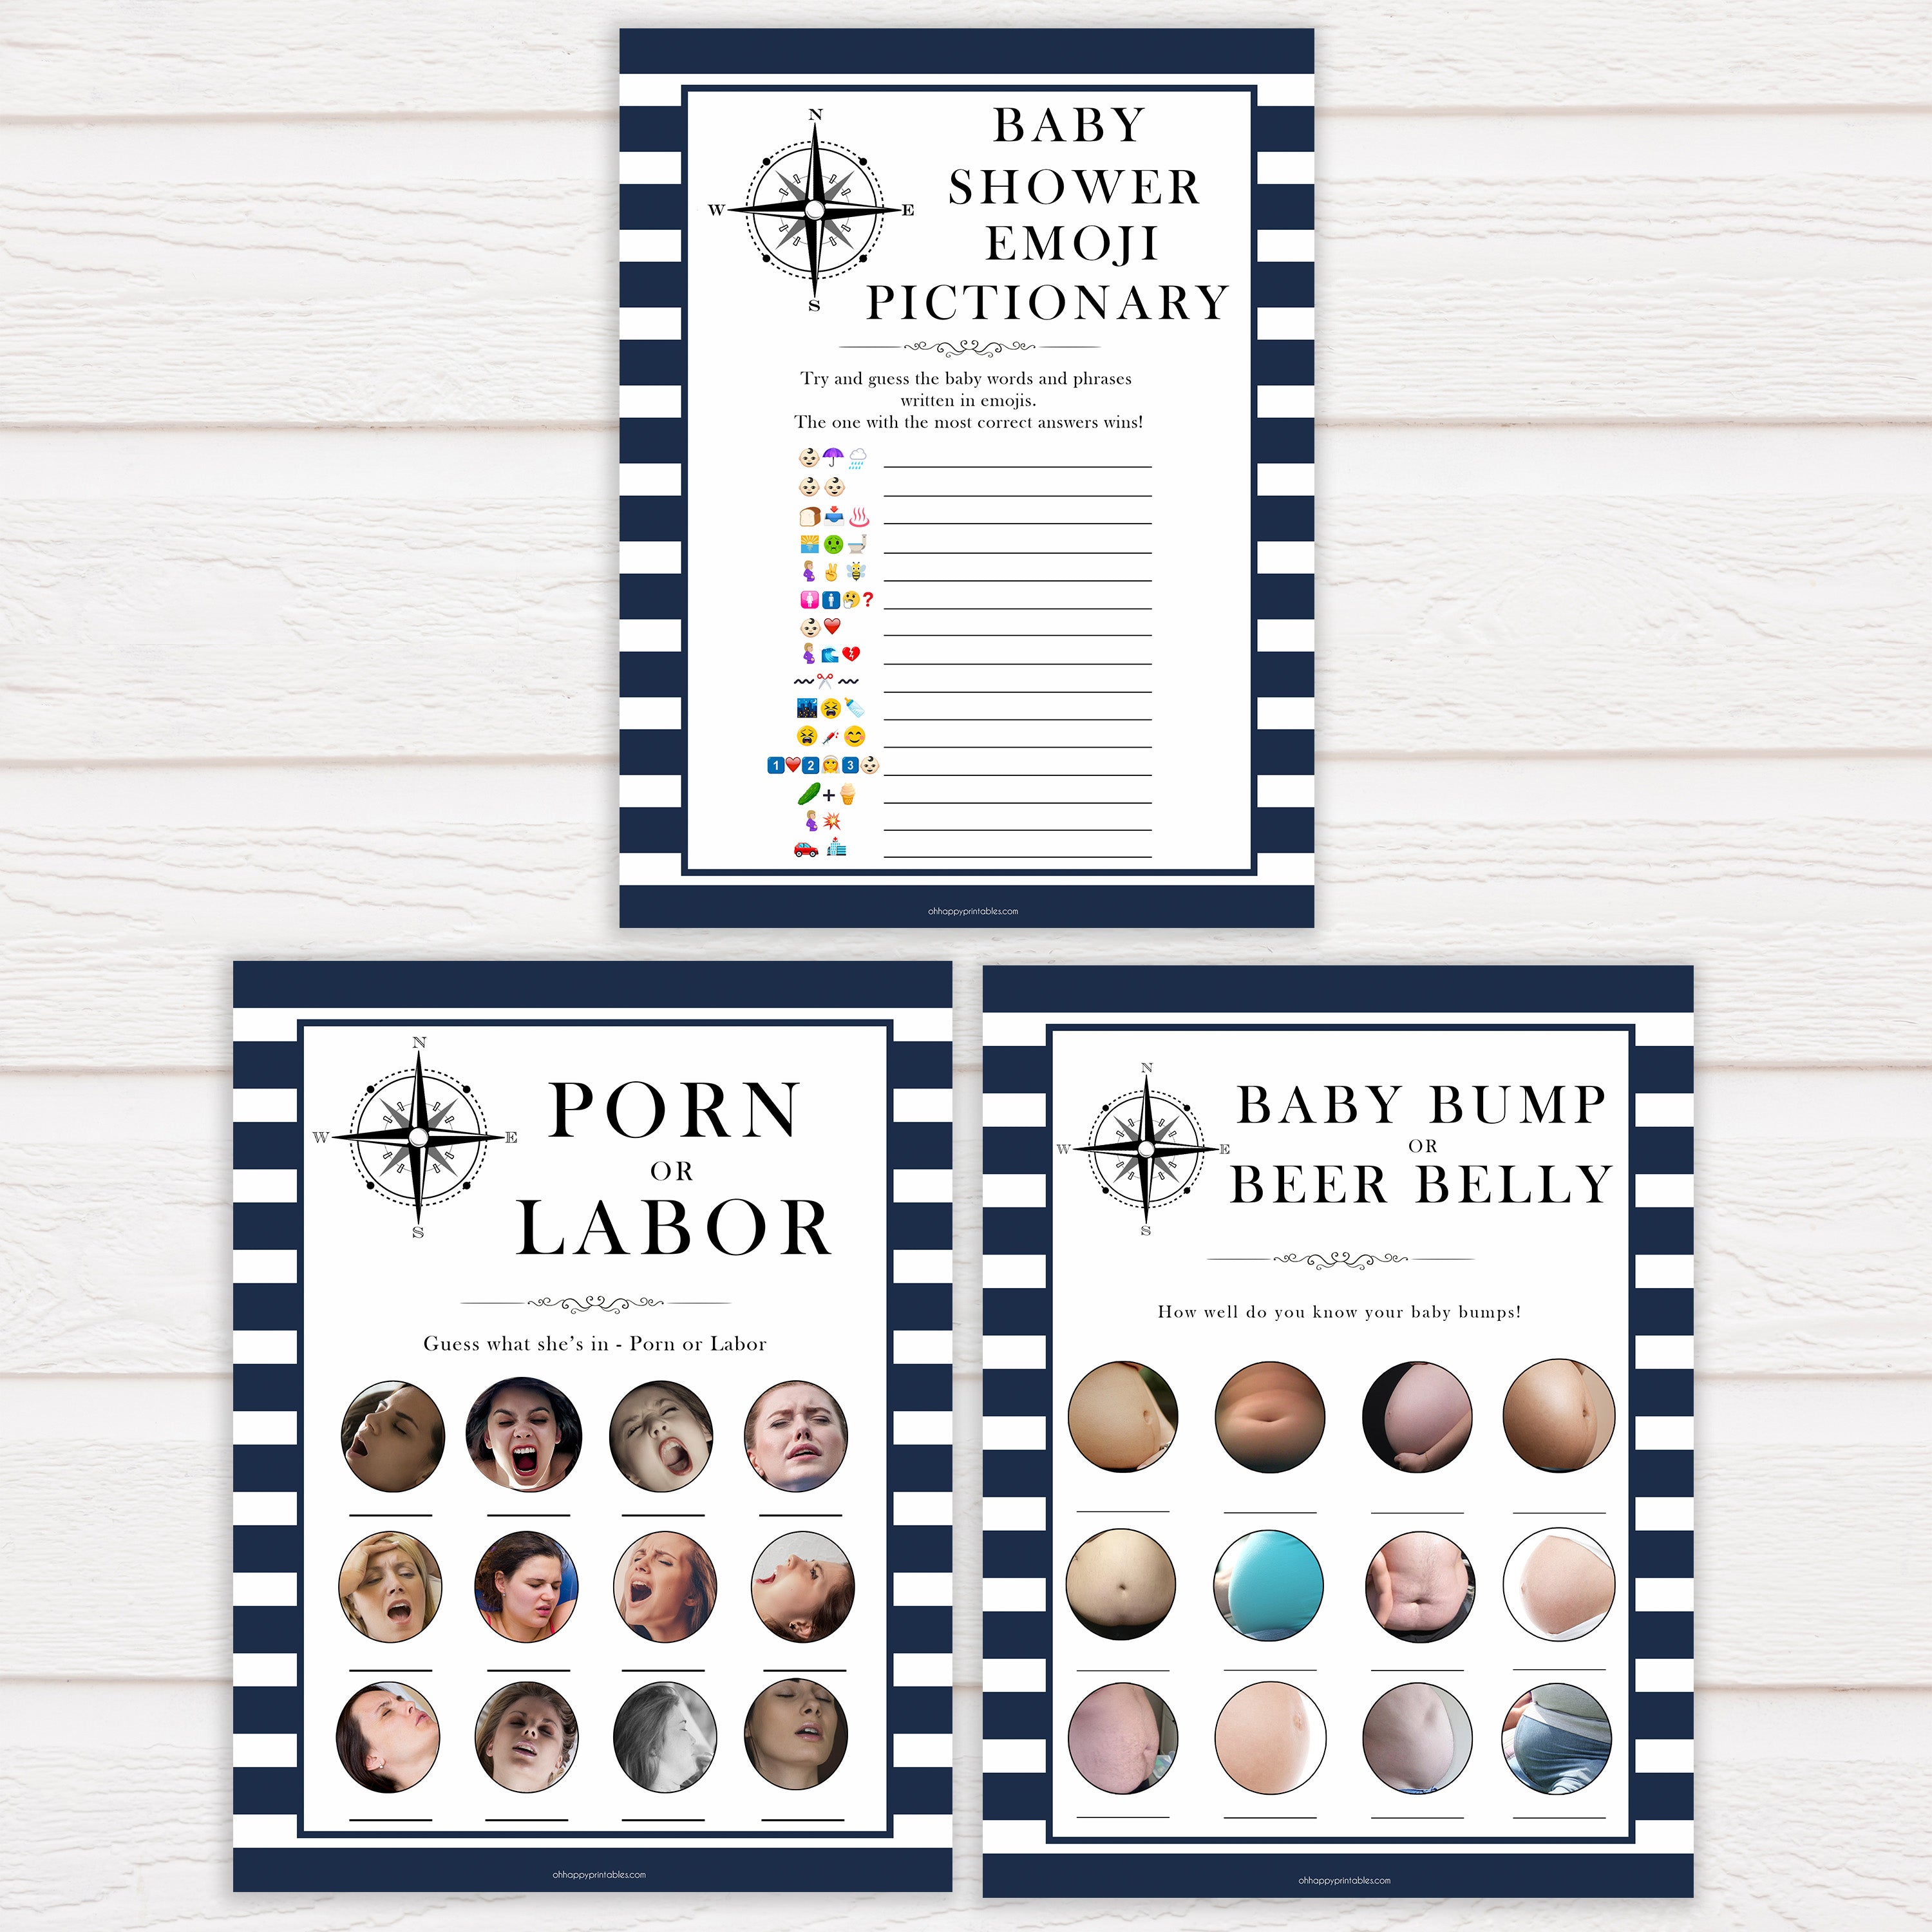 7 baby shower games, baby shower games bundles, Nautical baby shower games, baby shower games, printable baby shower games, baby shower games, fun baby games, ahoy its a boy, popular baby shower games, sailor baby games, boat baby games